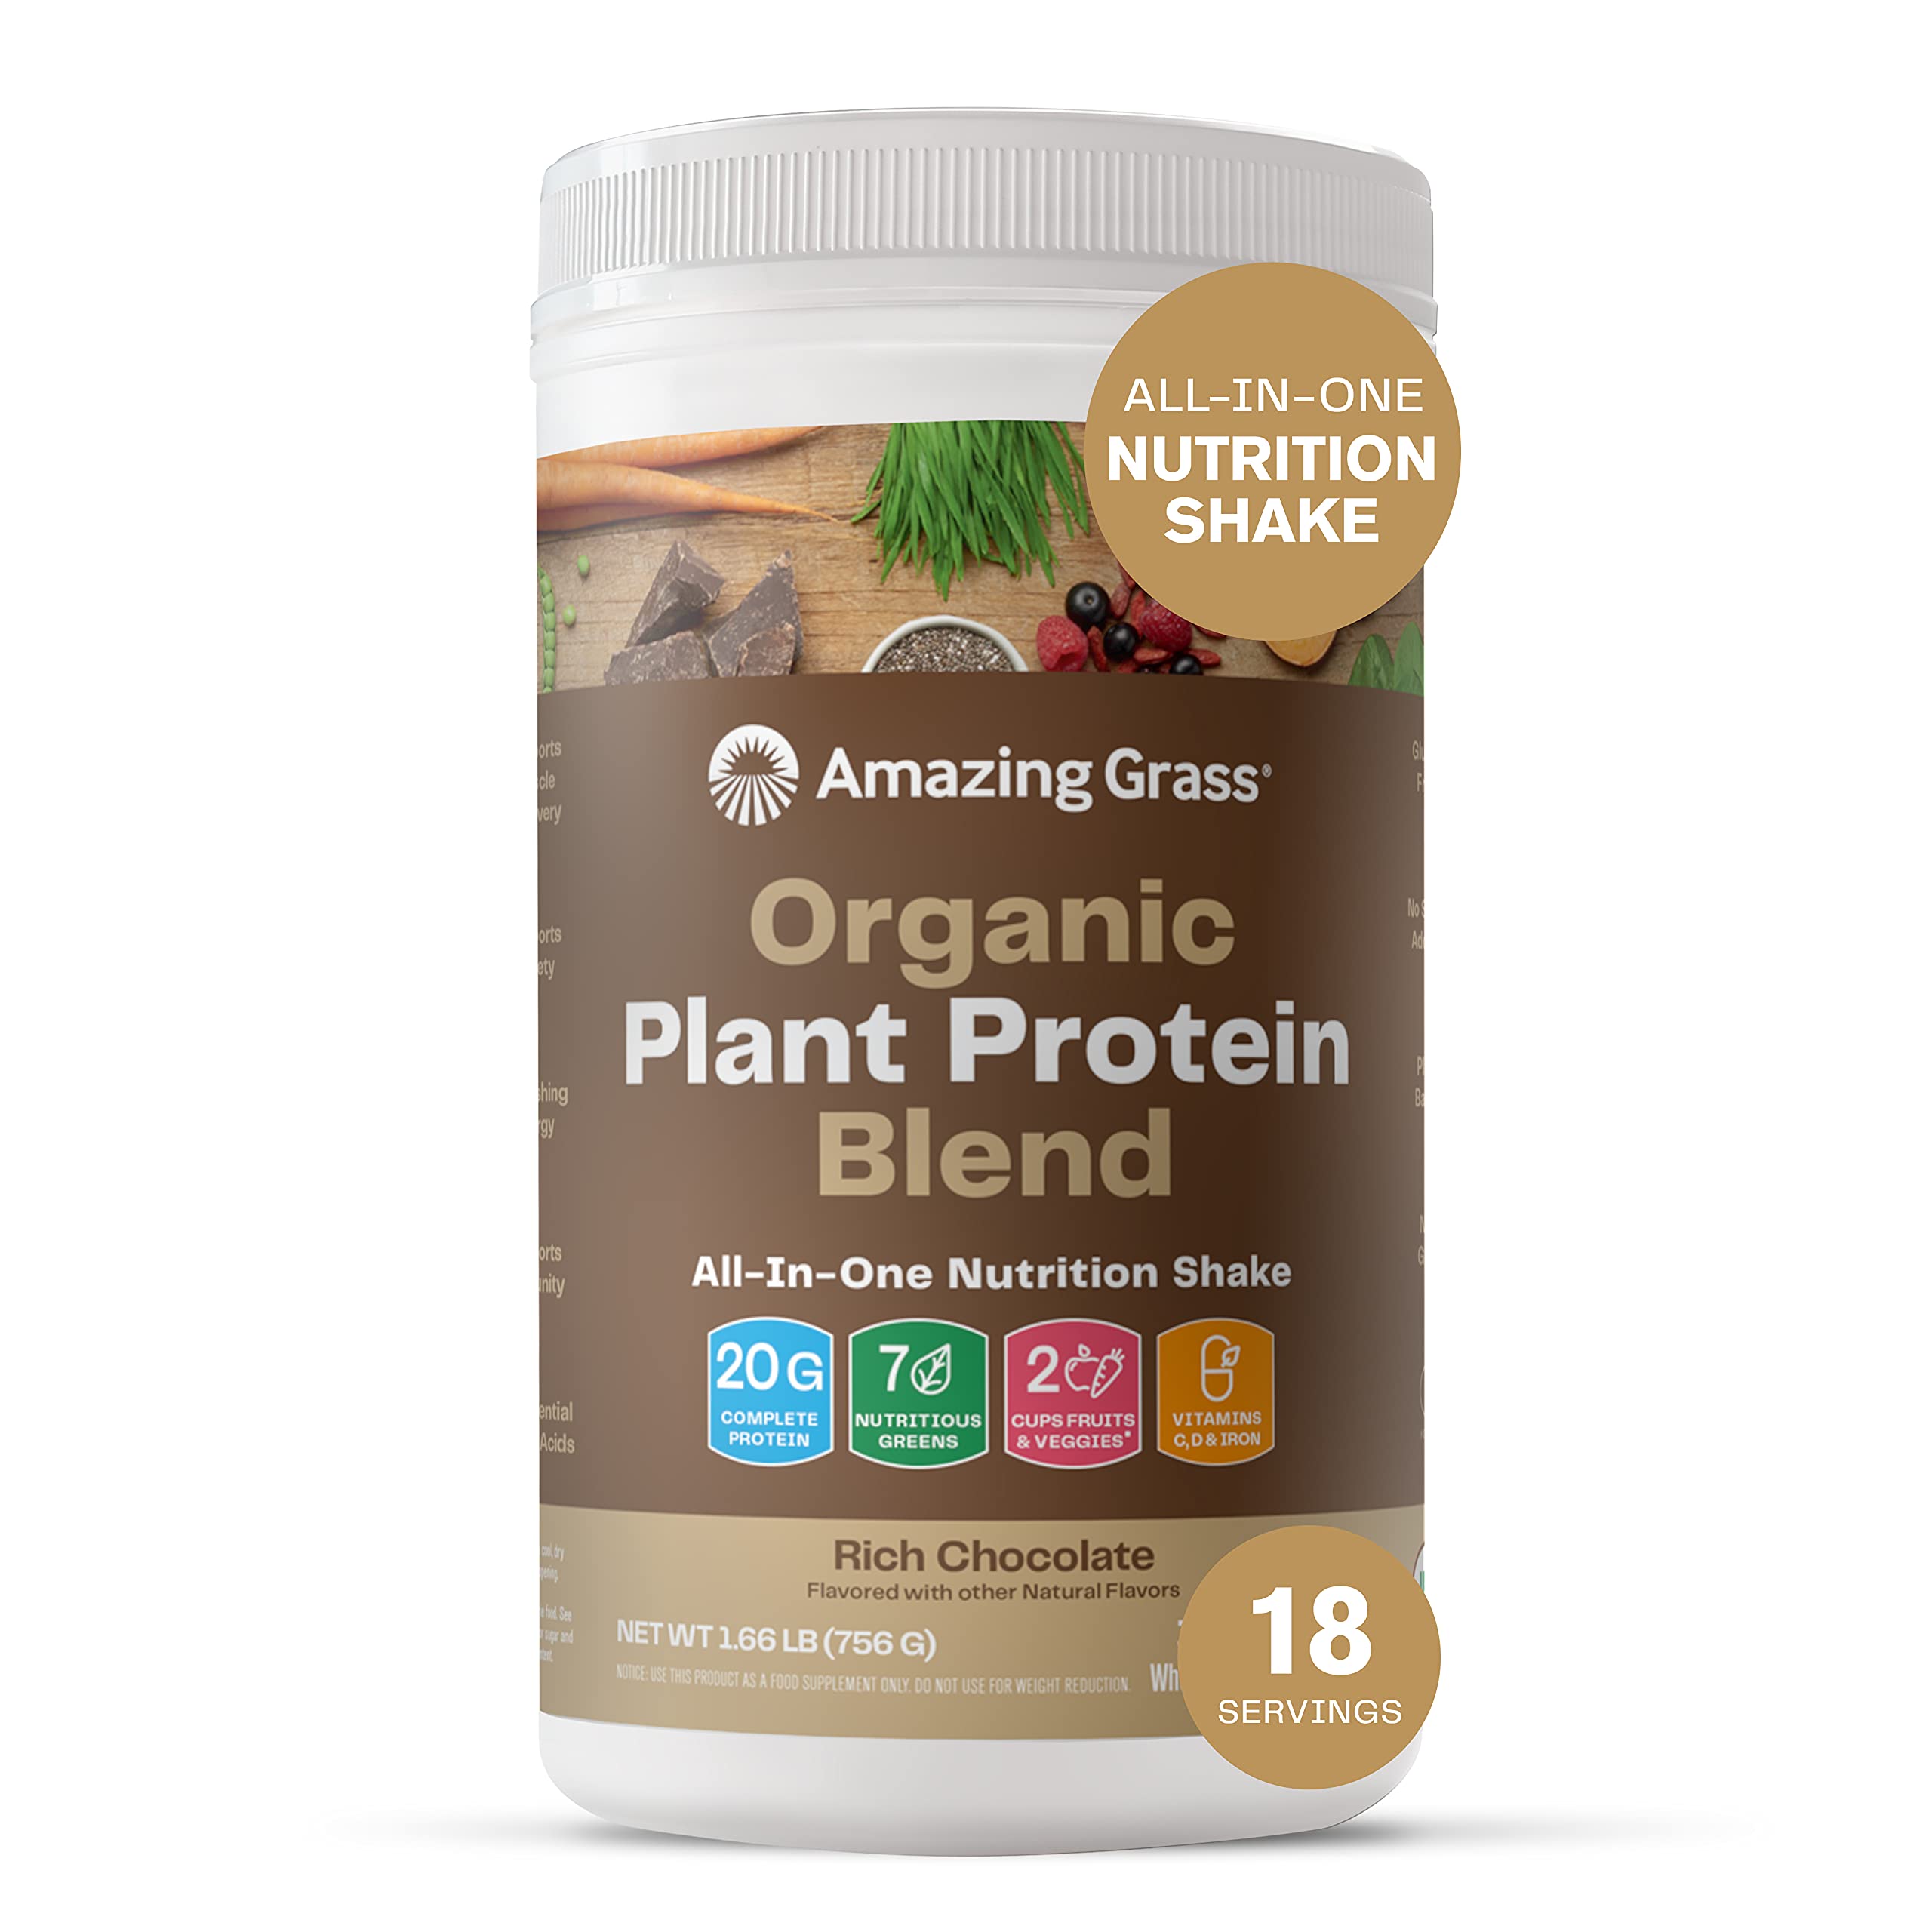 Amazing Grass Organic Plant Protein Blend: Vegan Protein Powder, New Protein Superfood Formula, All-In-One Nutrition Shake with Beet Root, Rich Cho...